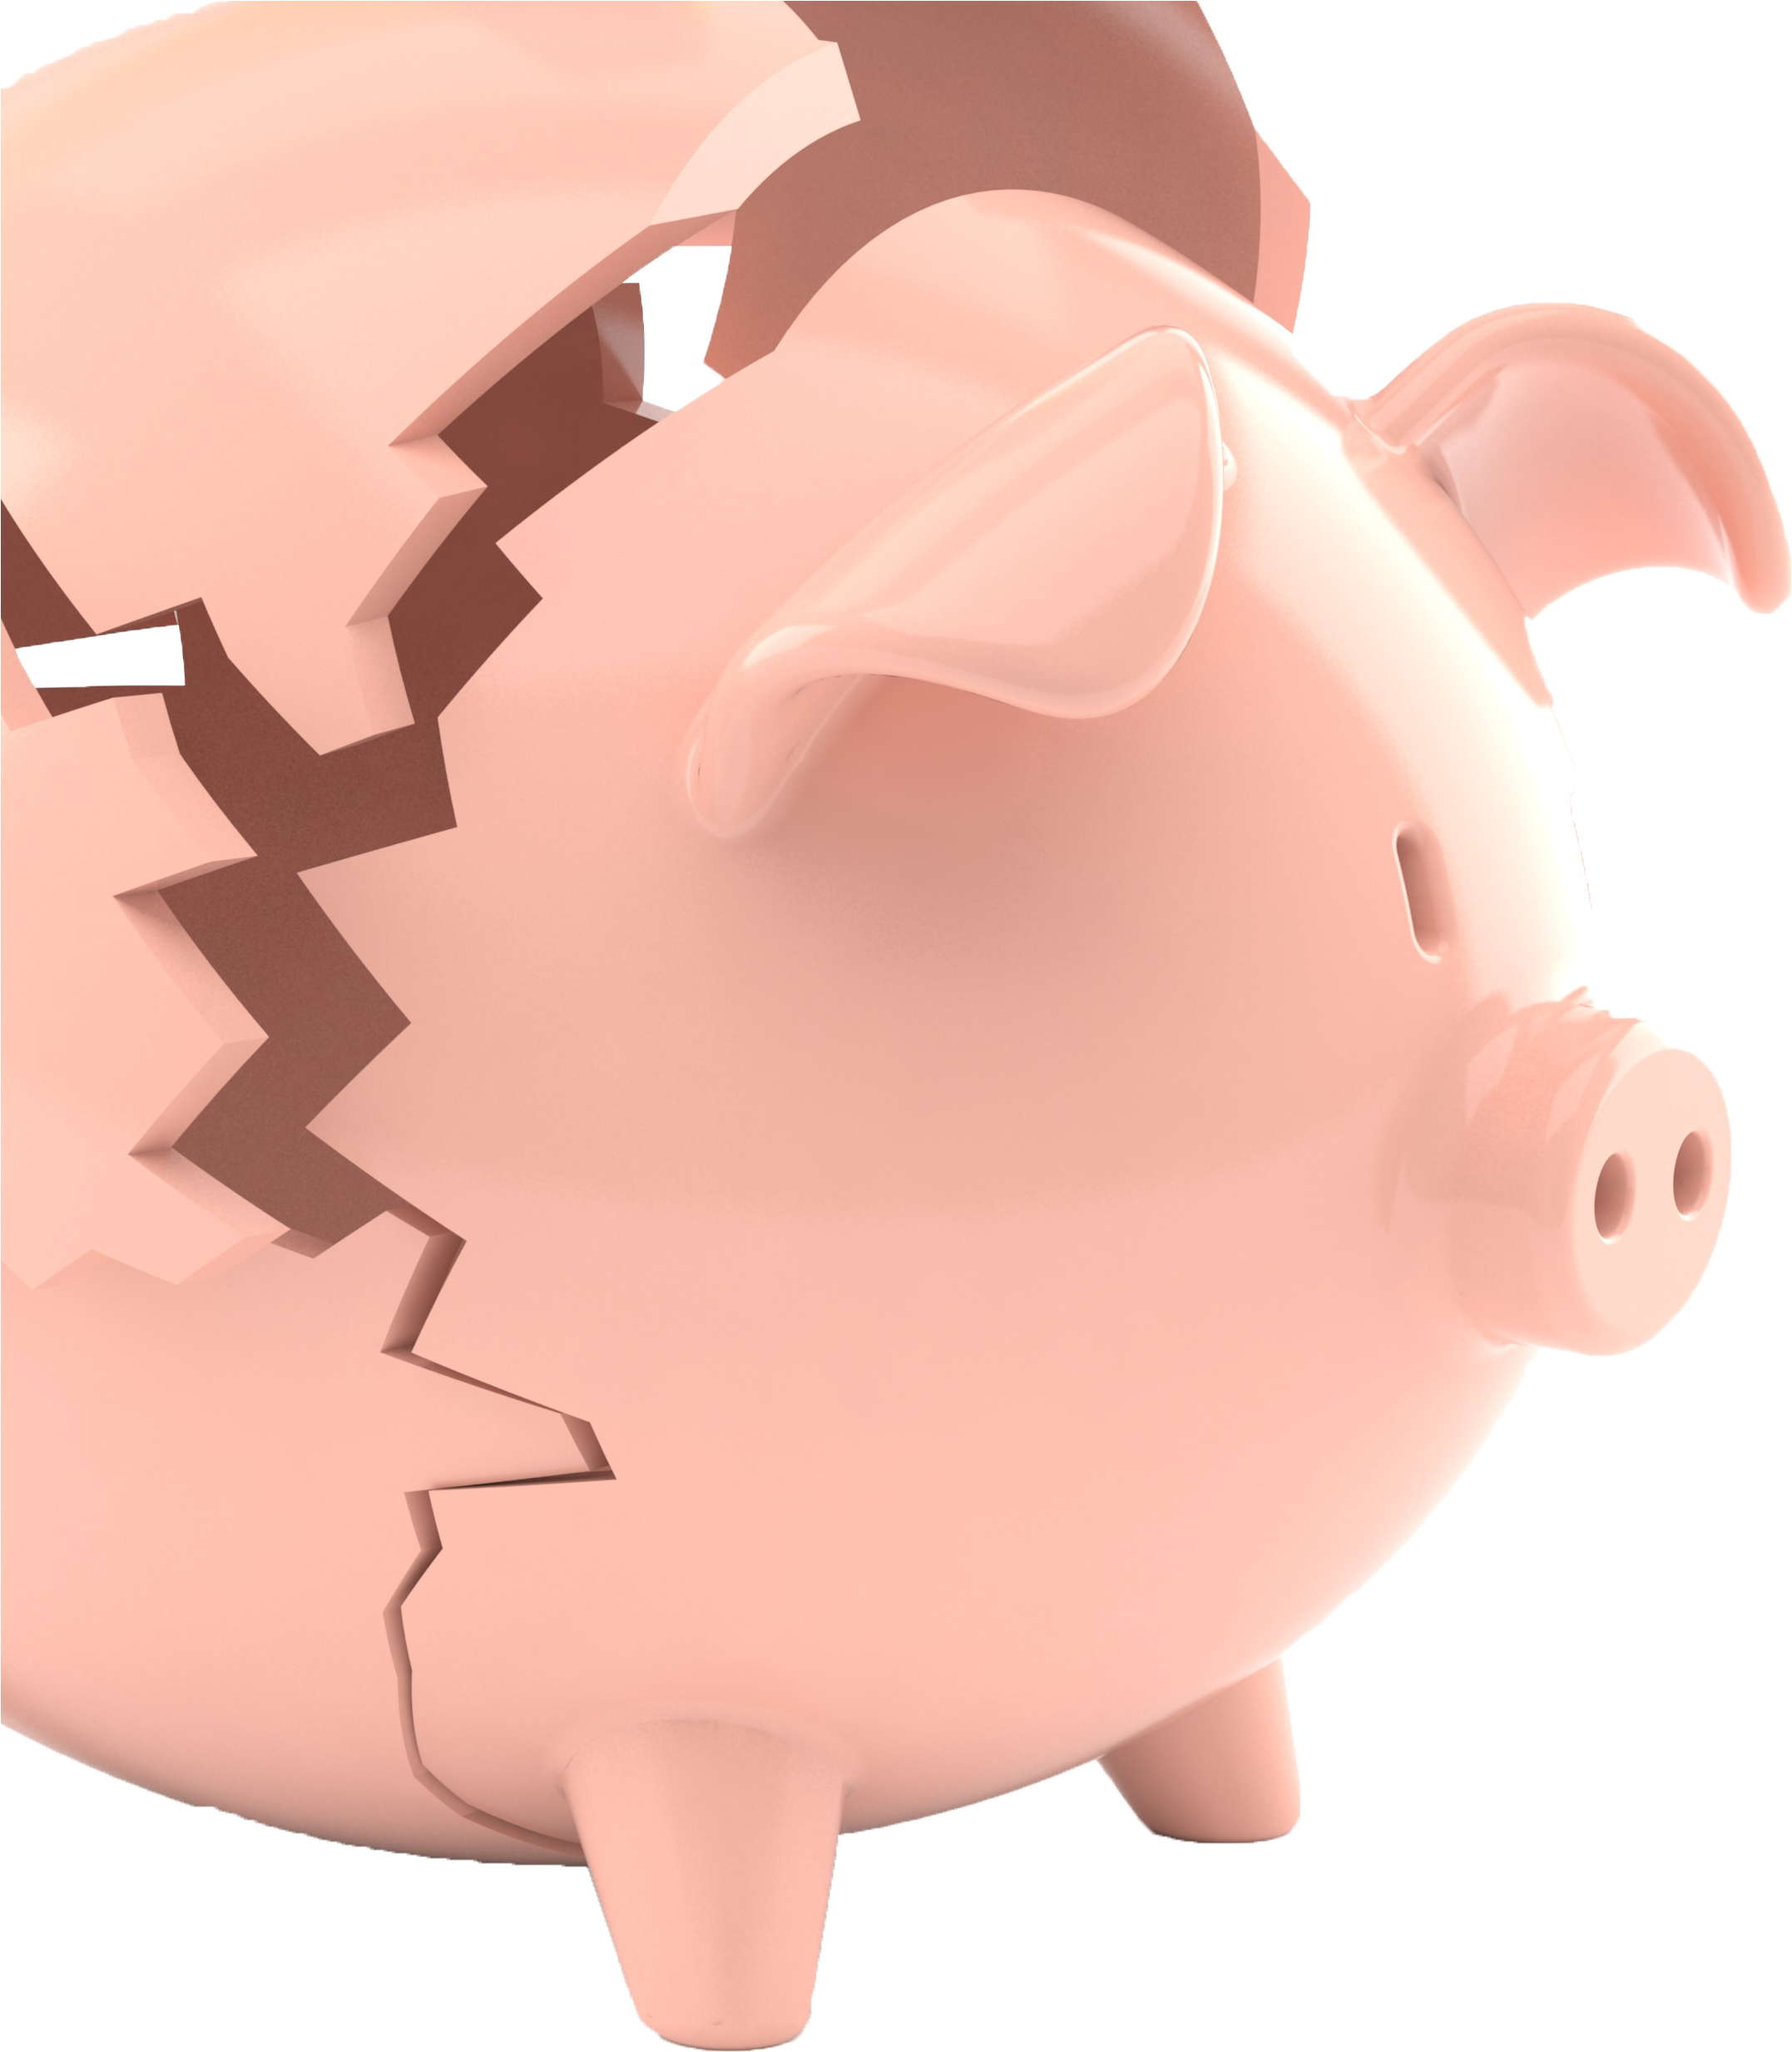 Broken Piggy Bank Hyperlinked To Rates Comparison Page